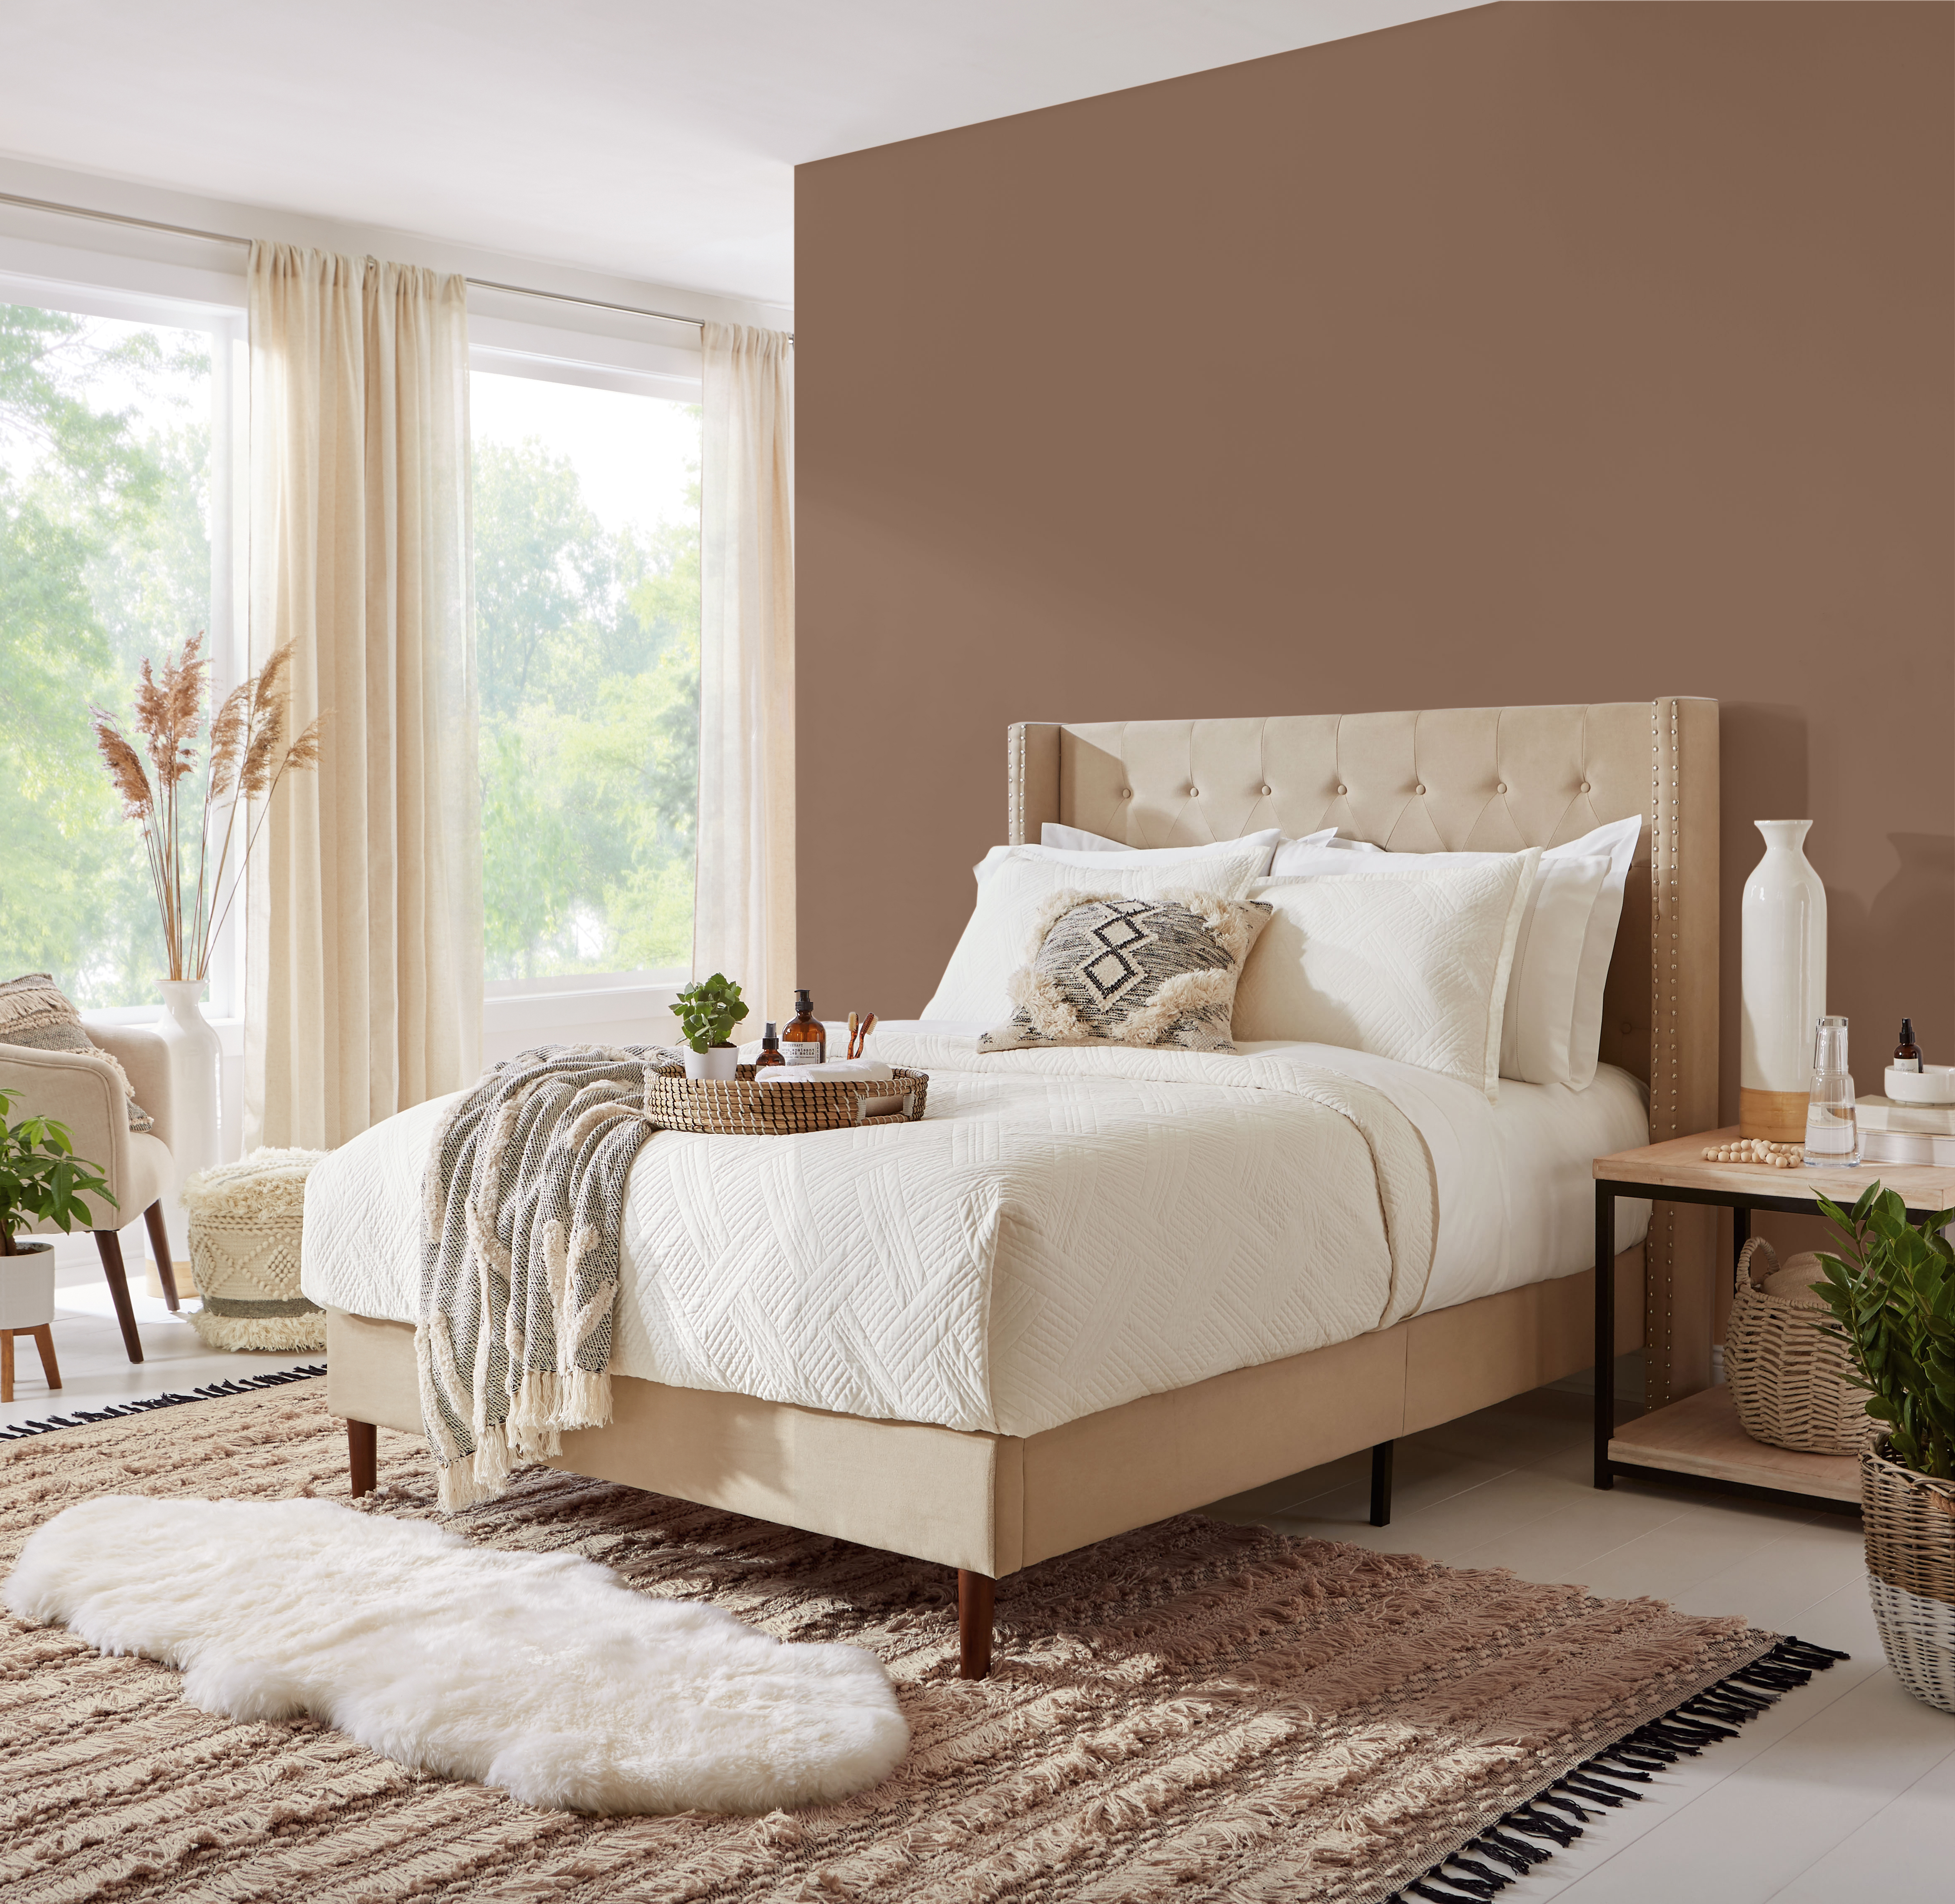 A contemporary/boho bedroom with large windows.  There is a comfy bed with white simple bedding.  One is painted in dark brown color called Wild Mustang.  